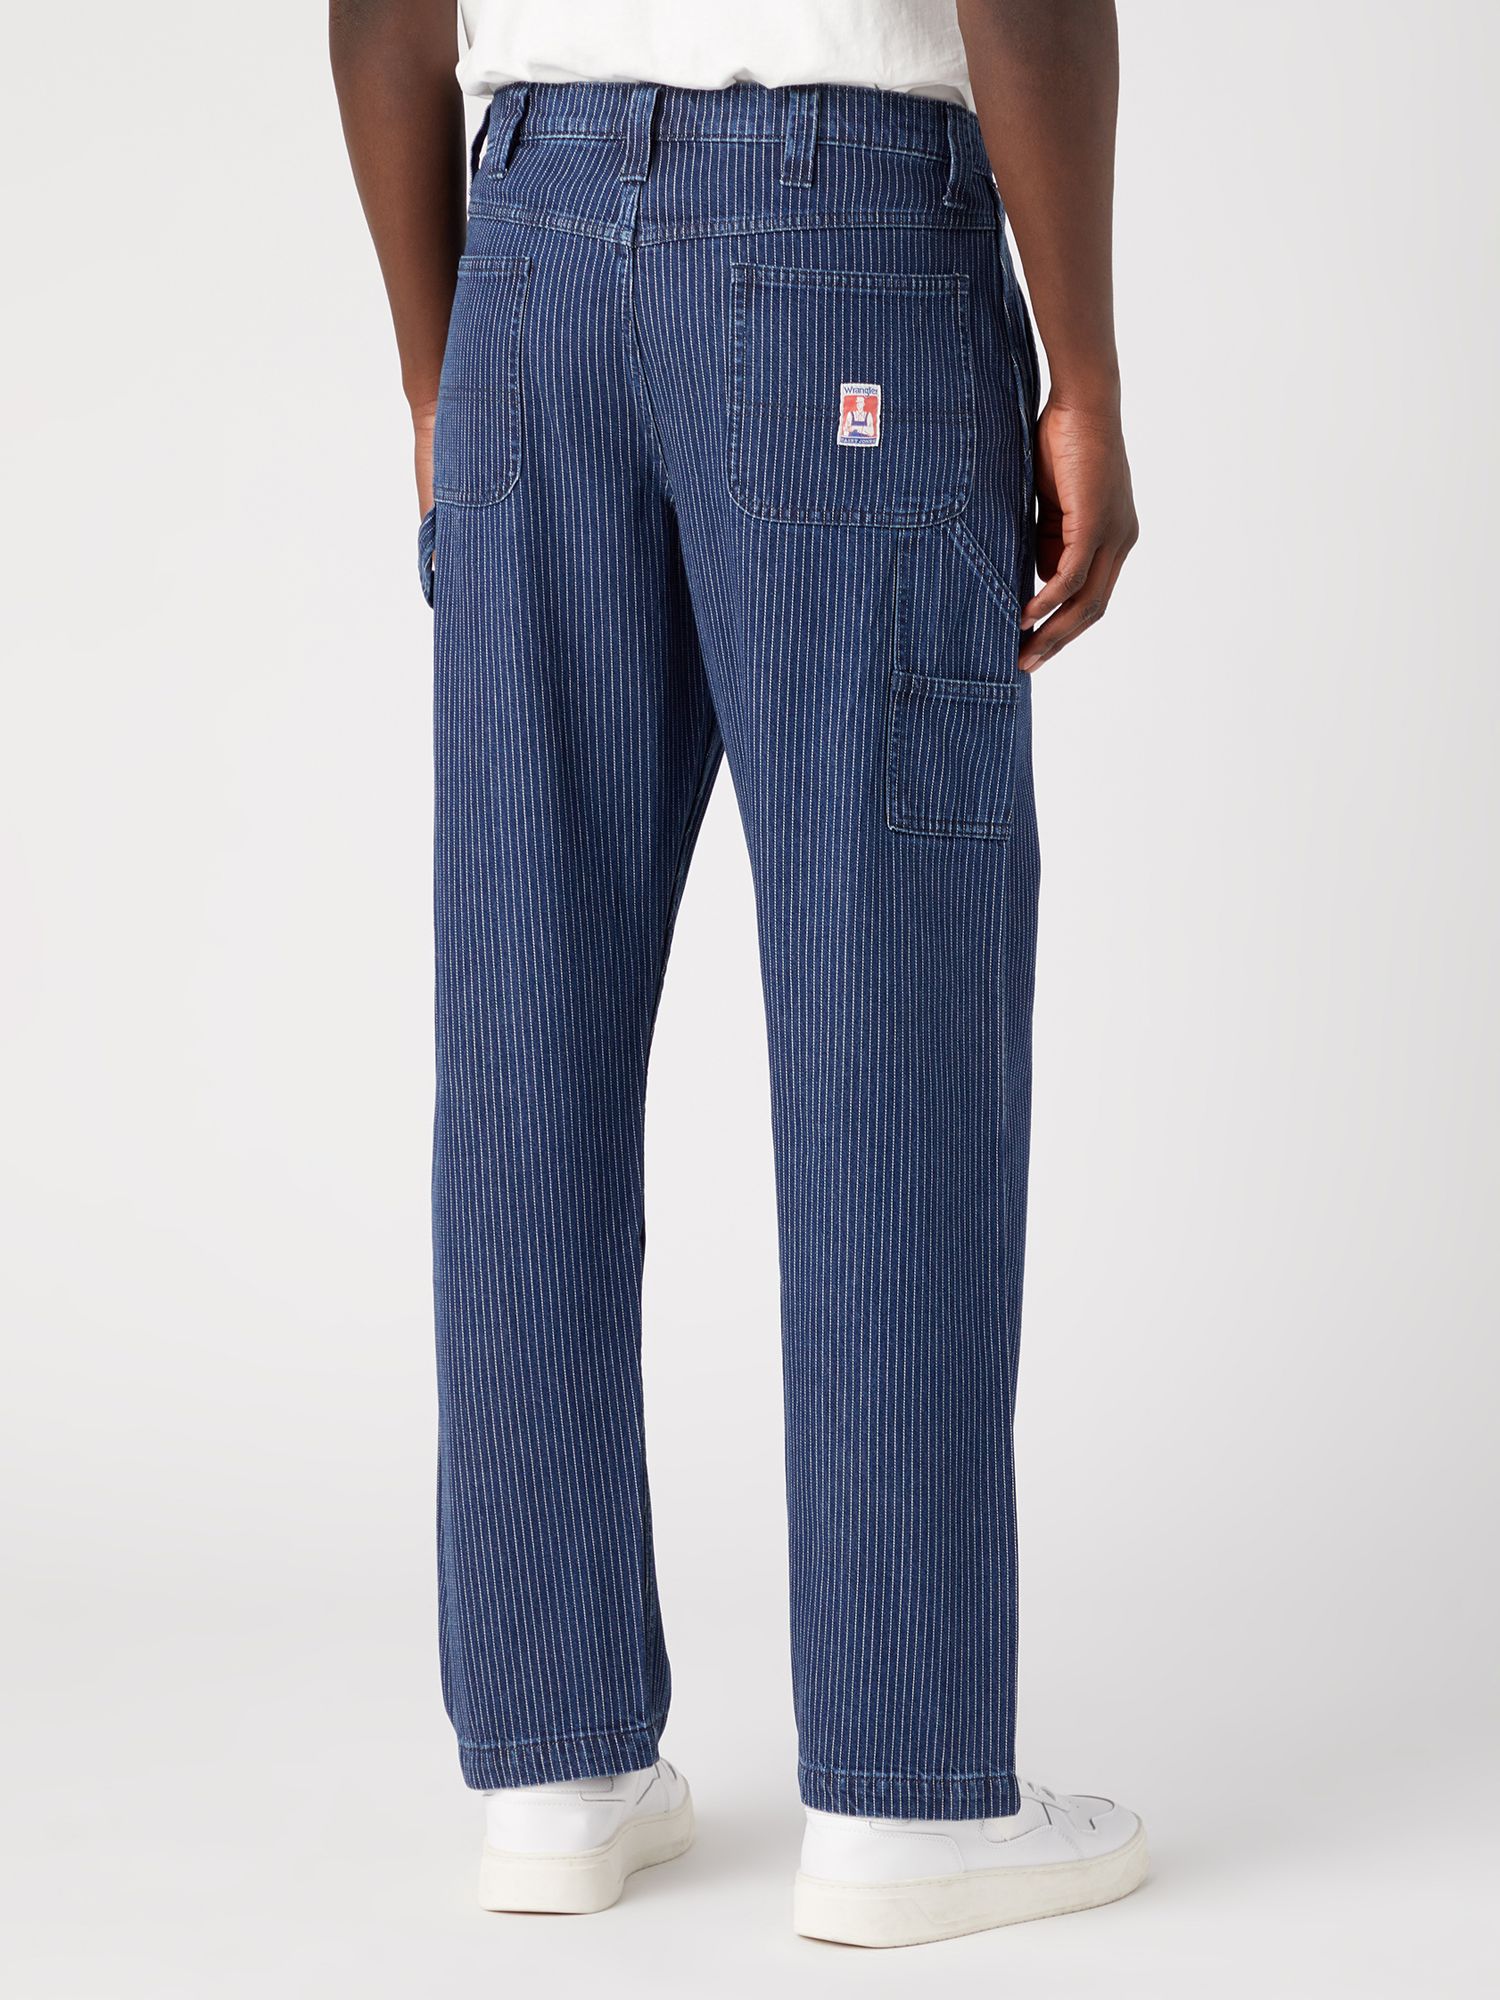 Wrangler Casey Relaxed Fit Carpenter Jeans, Blue at John Lewis & Partners